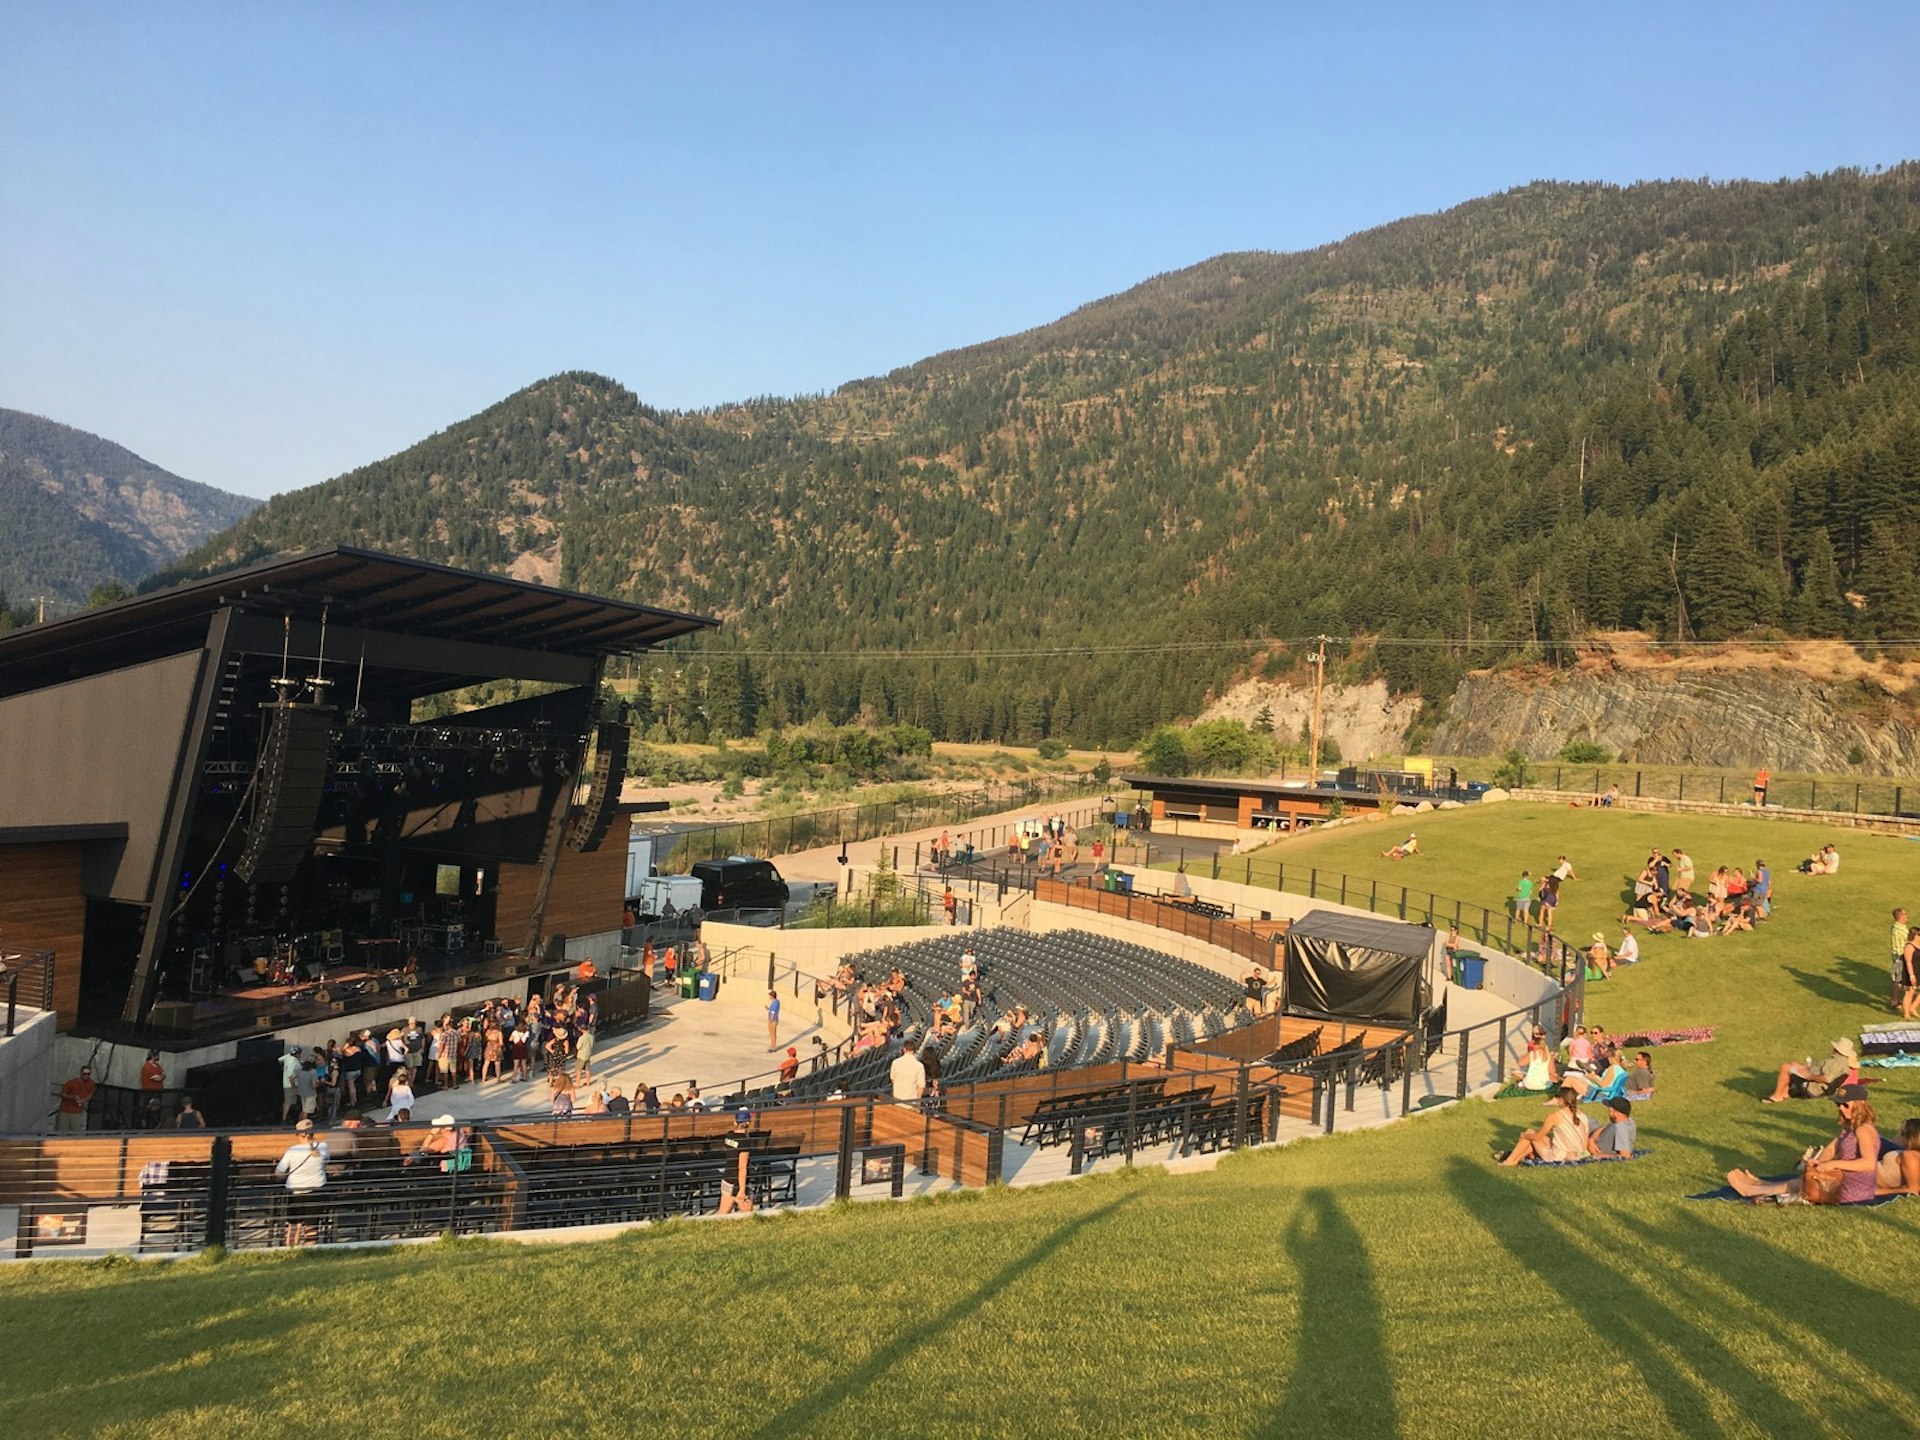 A large open-air amphitheater with seats and a grassy lawn backs up to a view of mountains and a river © Jay Gentile / Lonely Planet